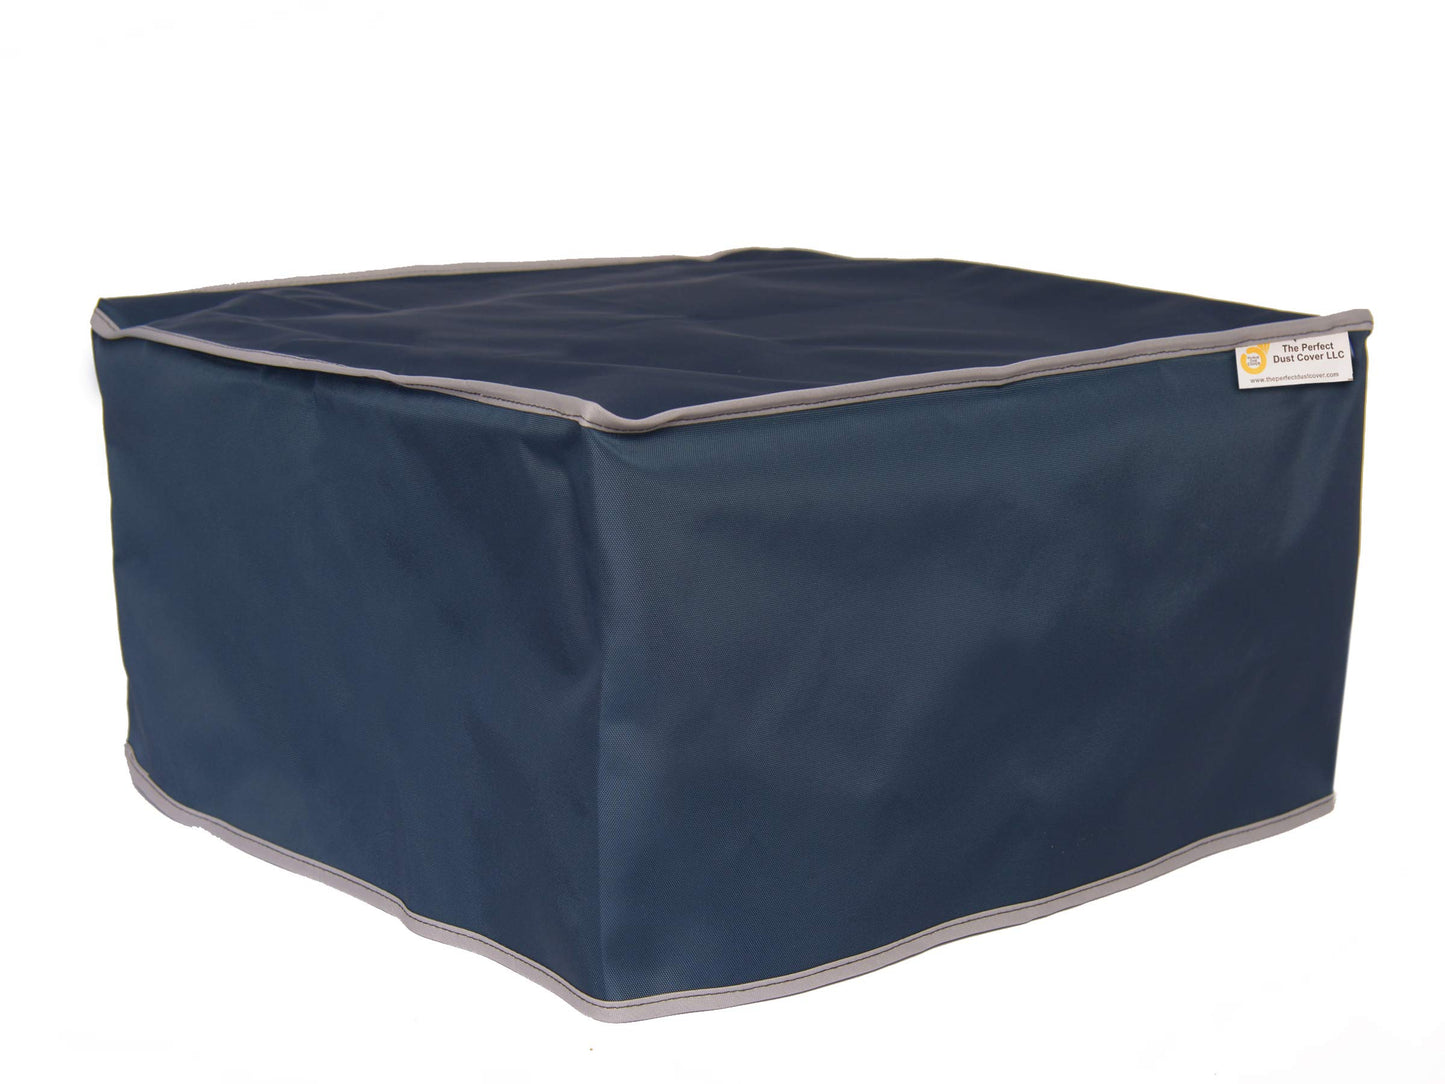 The Perfect Dust Cover, Navy Blue Nylon Short Cover for Epson SureColor P10000 44'' Standard Edition Printer, Anti Static Waterproof, Dimensions 74''W x 38.6''D x 12''H by The Perfect Dust Cover LLC